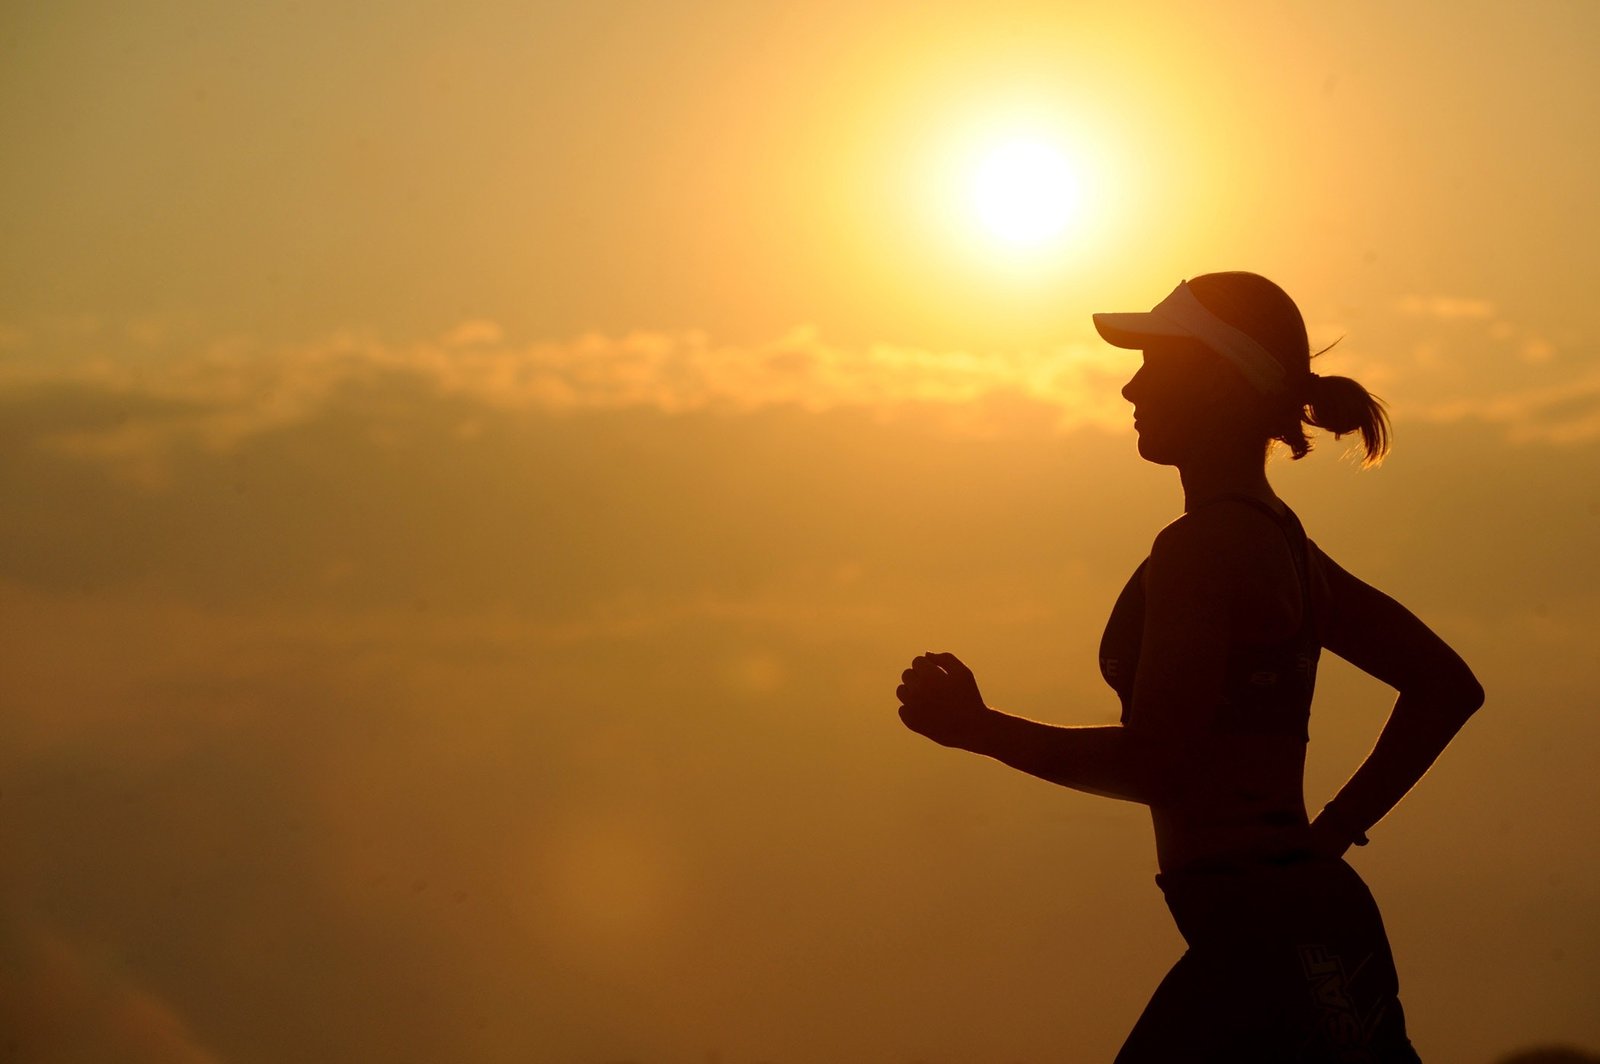 Silhouette of a woman with a ponytail wearing a sun visor, running against the backdrop of the midday sun